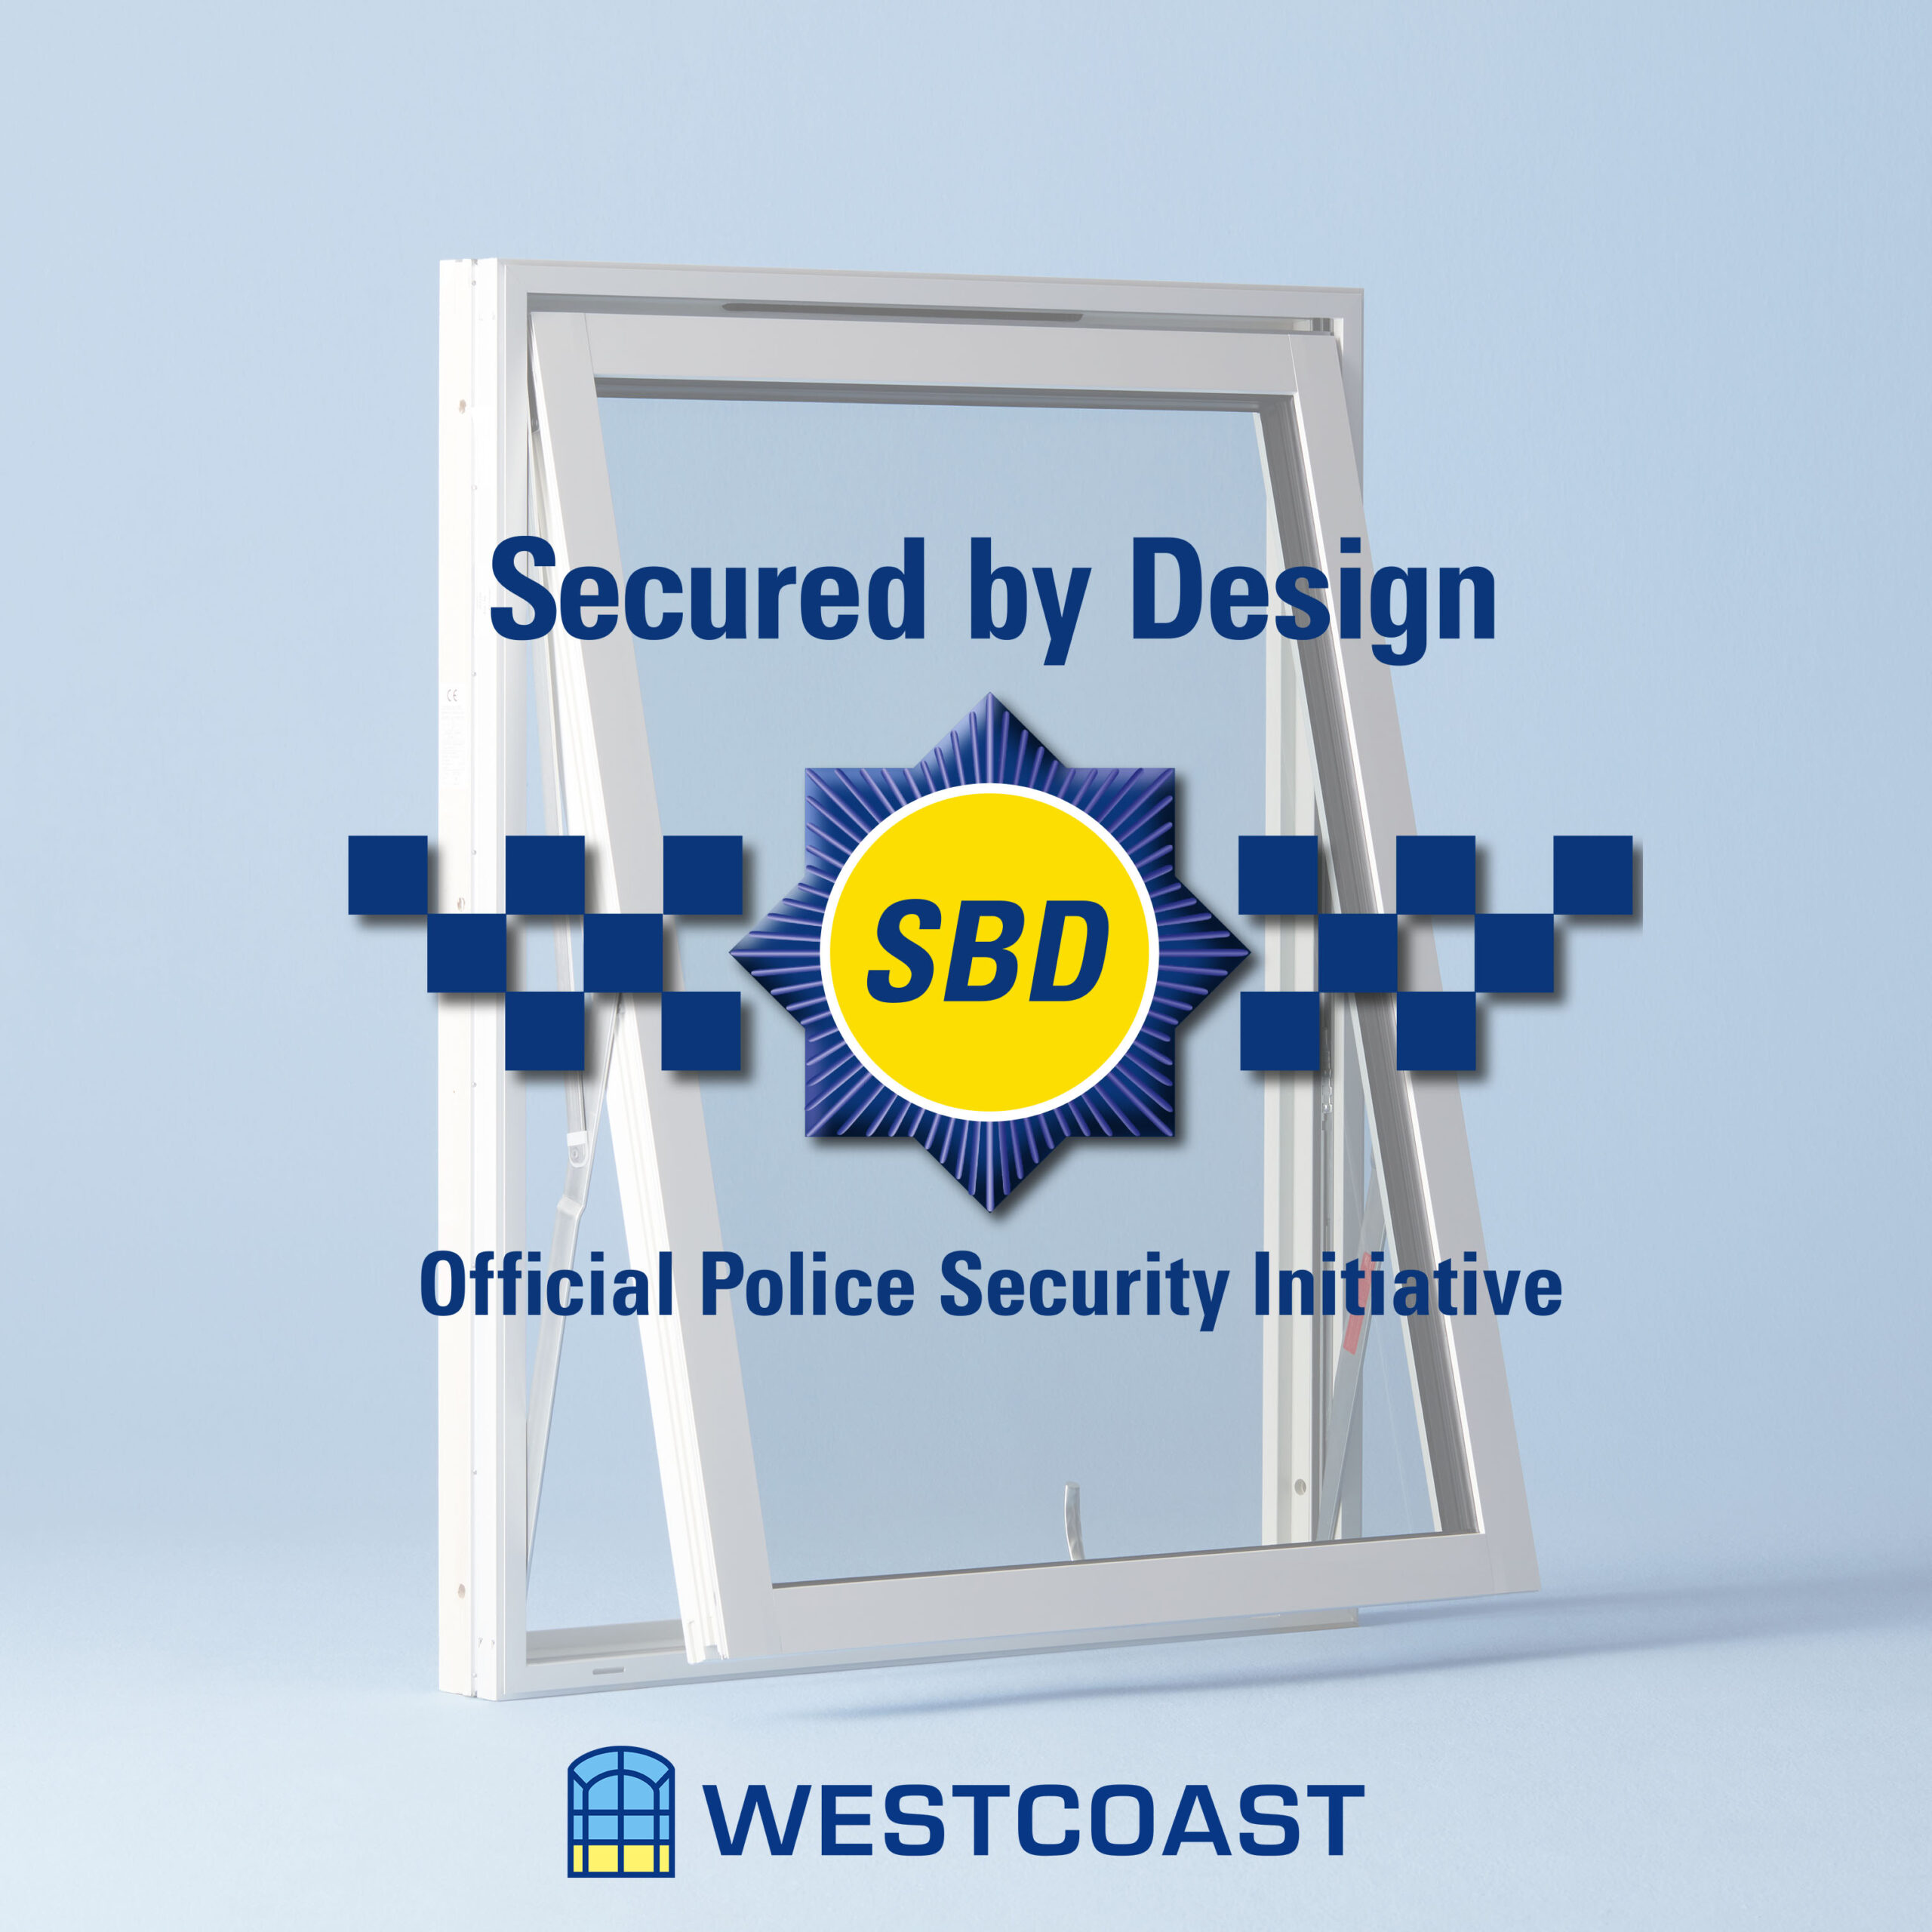 Westcoast Secured by Design certified composite windows